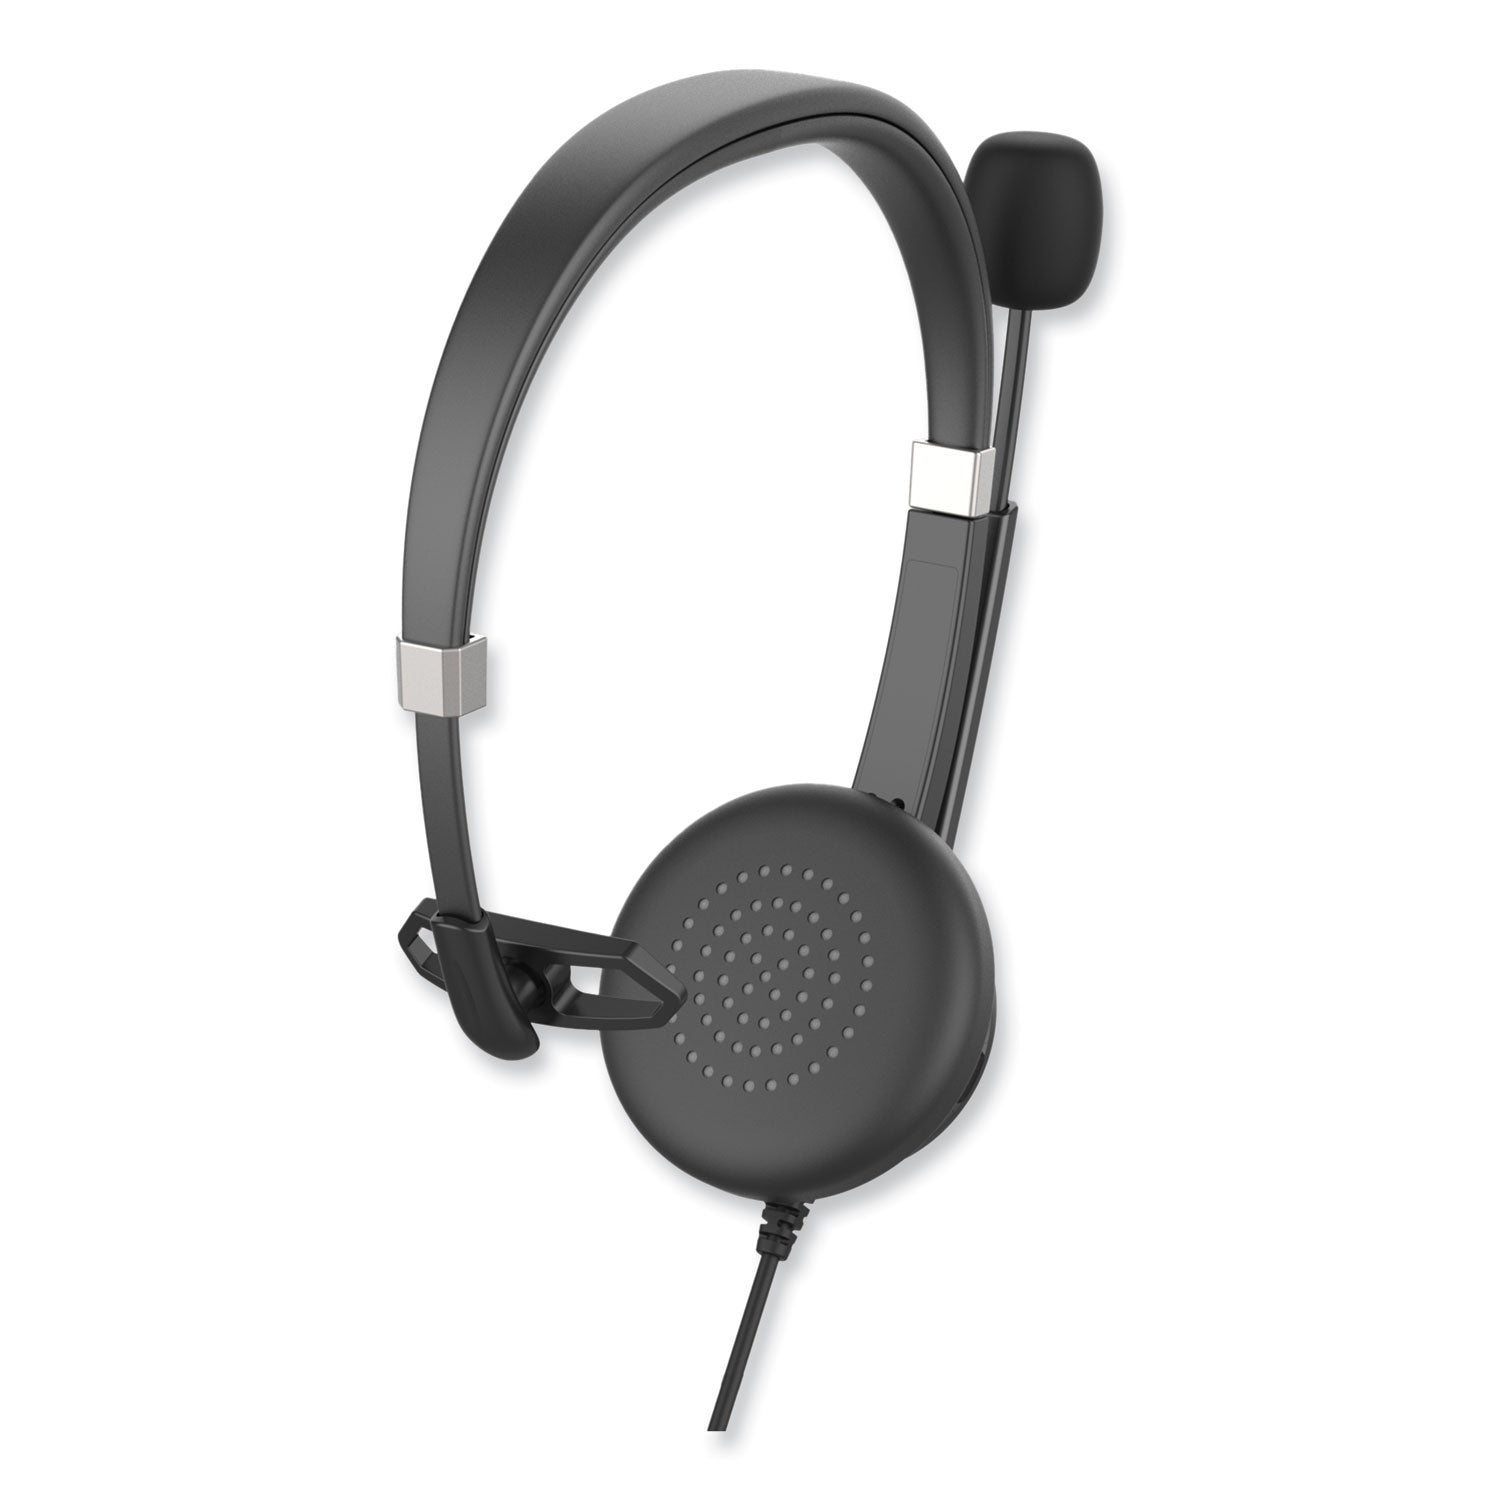 ivr70001-monaural-over-the-head-headset-black-silver_ivr70001 - 4